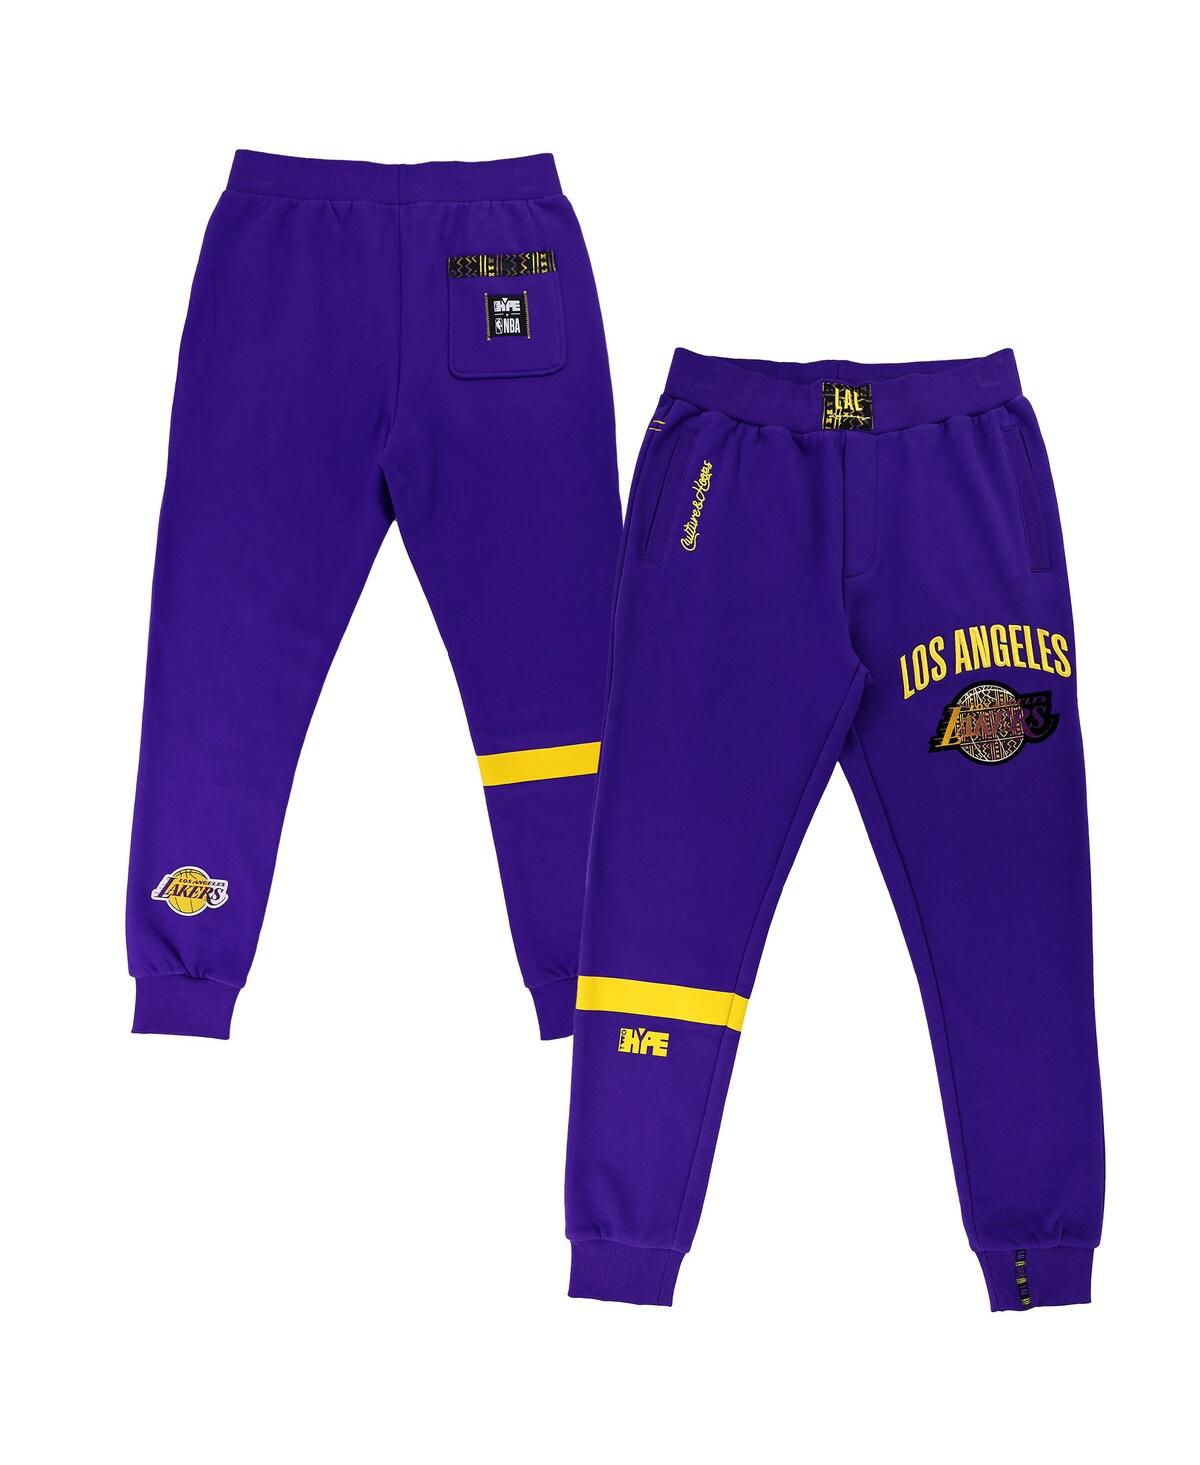 Men's and Women's Nba x Two Hype Purple Los Angeles Lakers Culture & Hoops Heavyweight Jogger Pants - Purple